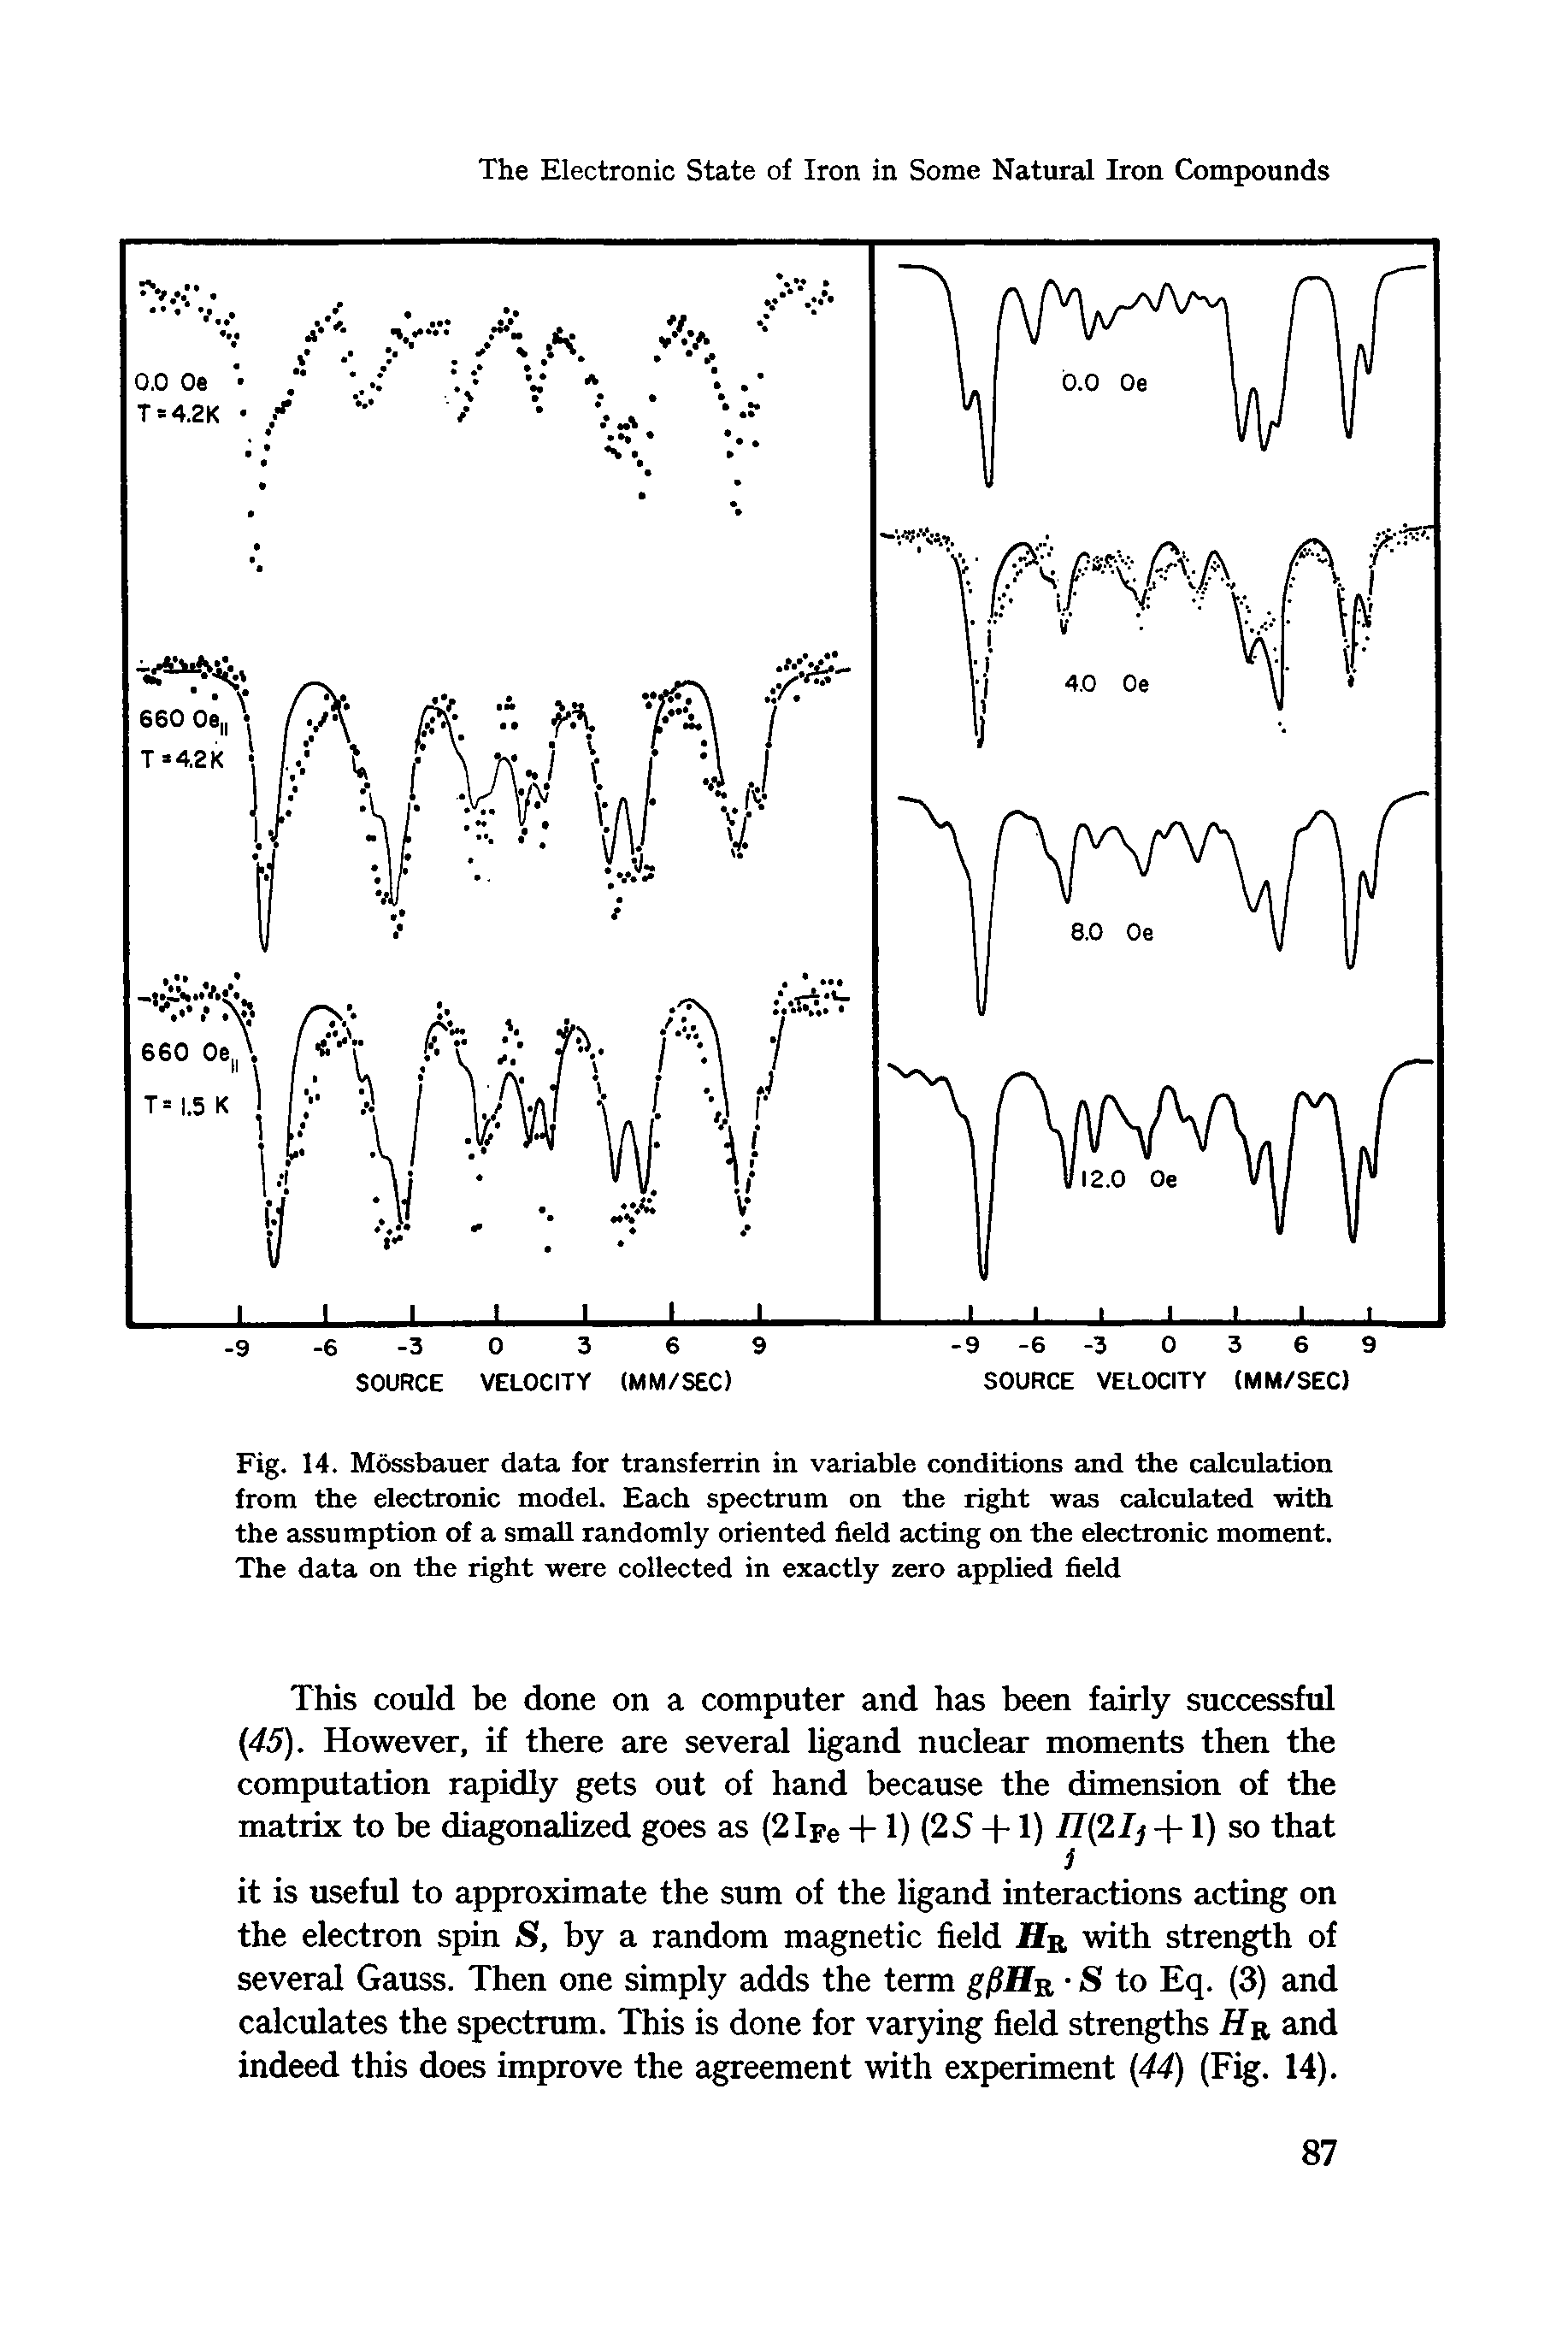 Fig. 14. Mossbauer data for transferrin in variable conditions and the calculation from the electronic model. Each spectrum on the right was calculated with the assumption of a small randomly oriented field acting on the electronic moment. The data on the right were collected in exactly zero applied field...